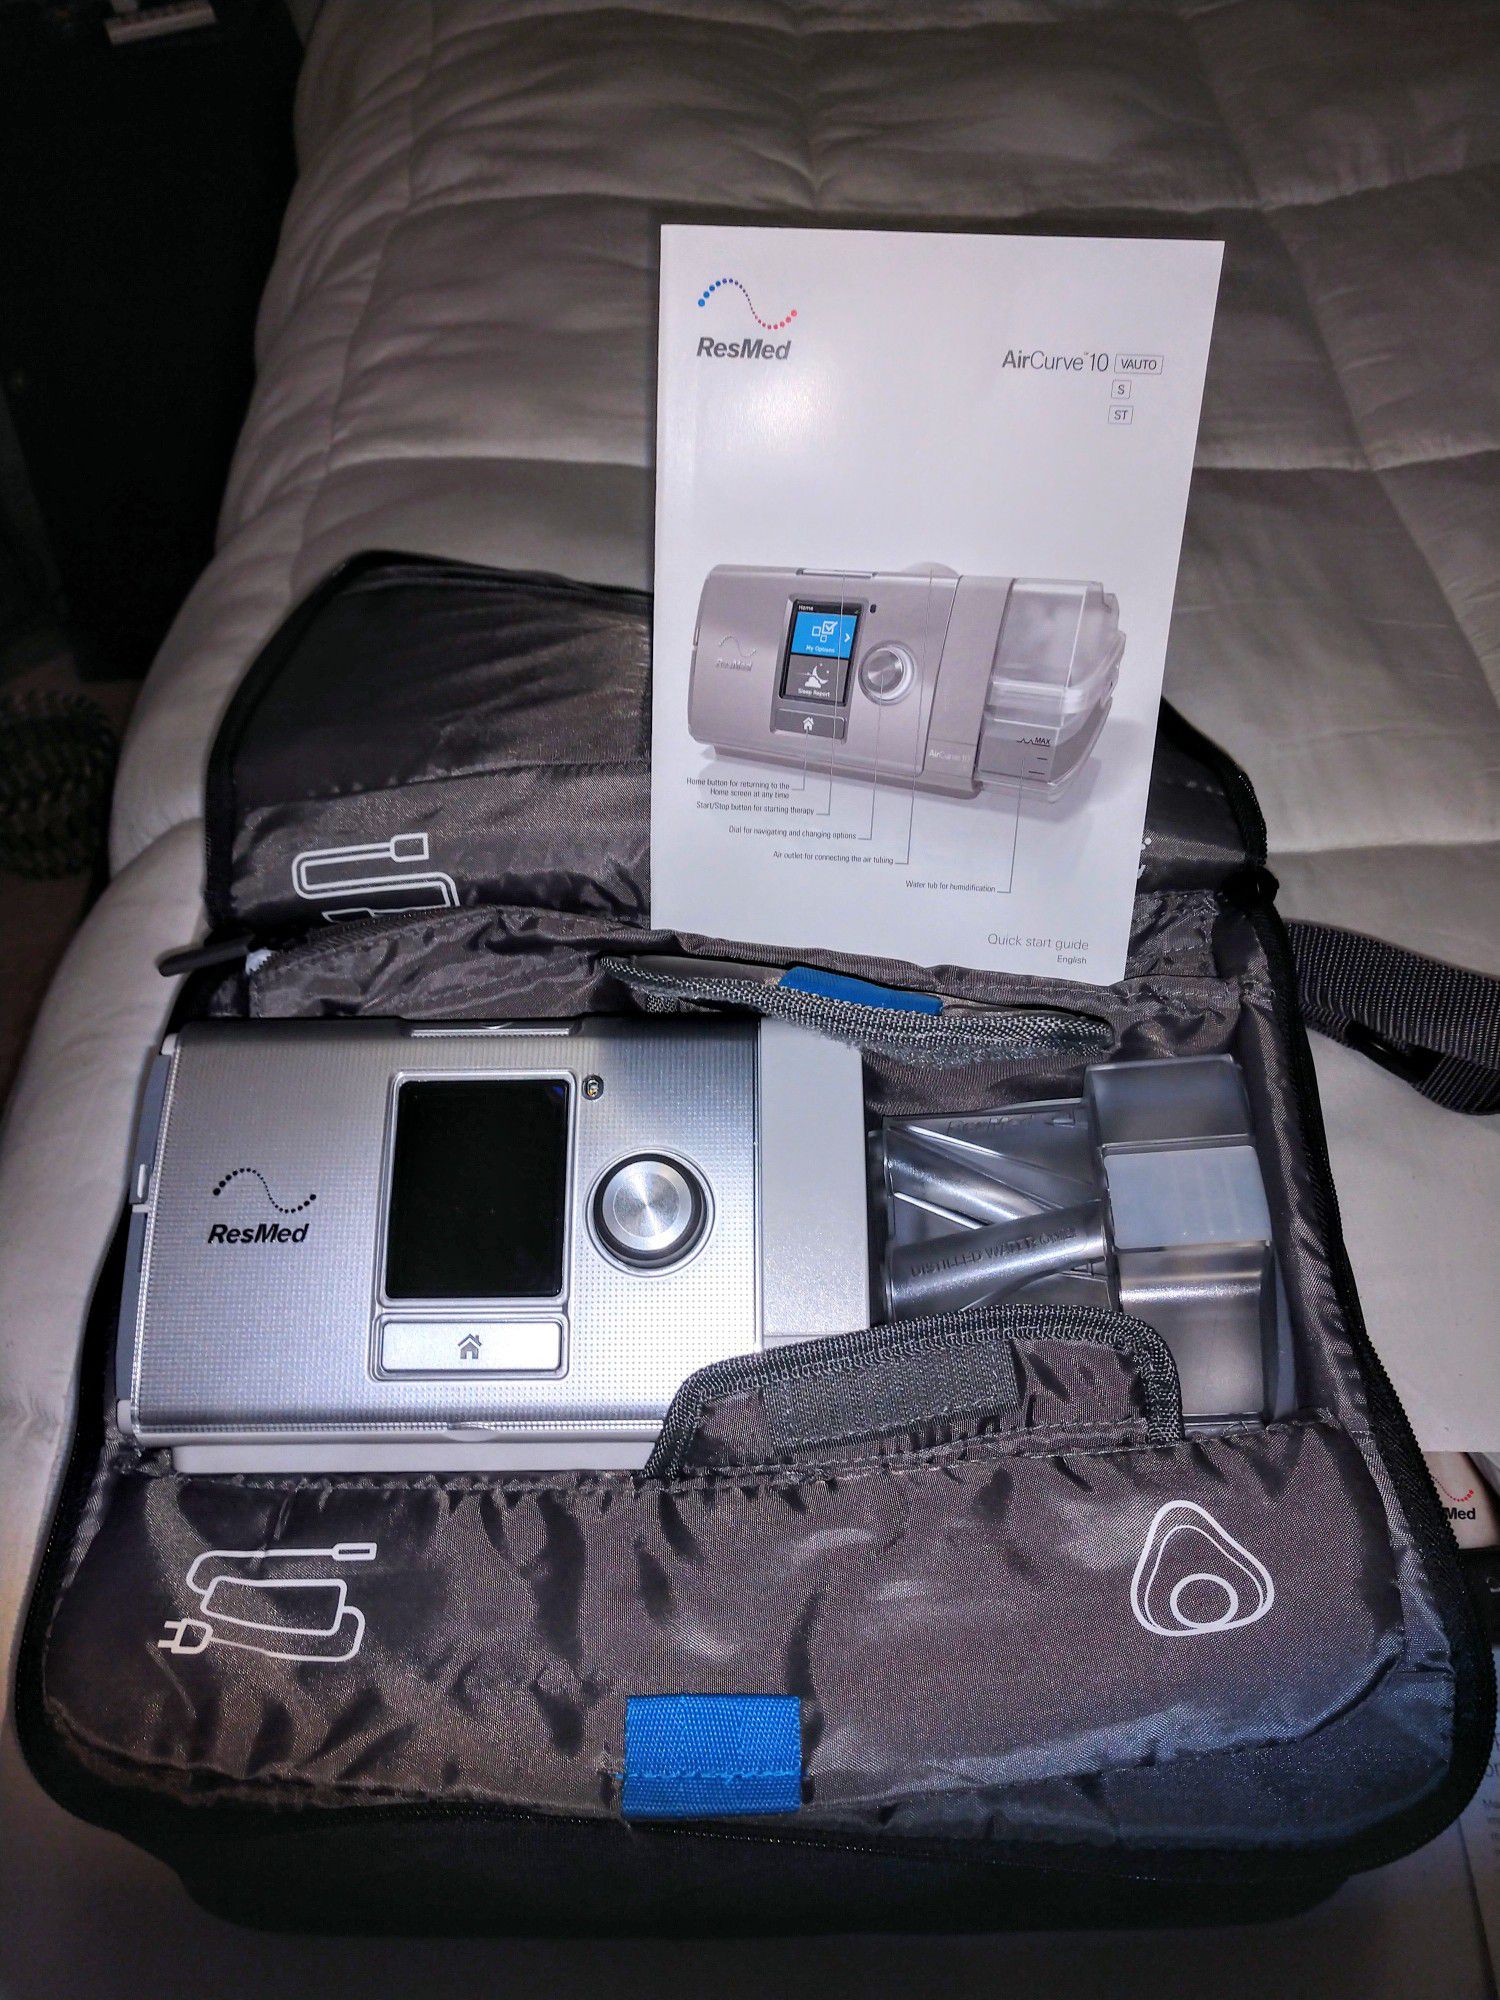 CPAP: Aircurve 10VAUTO